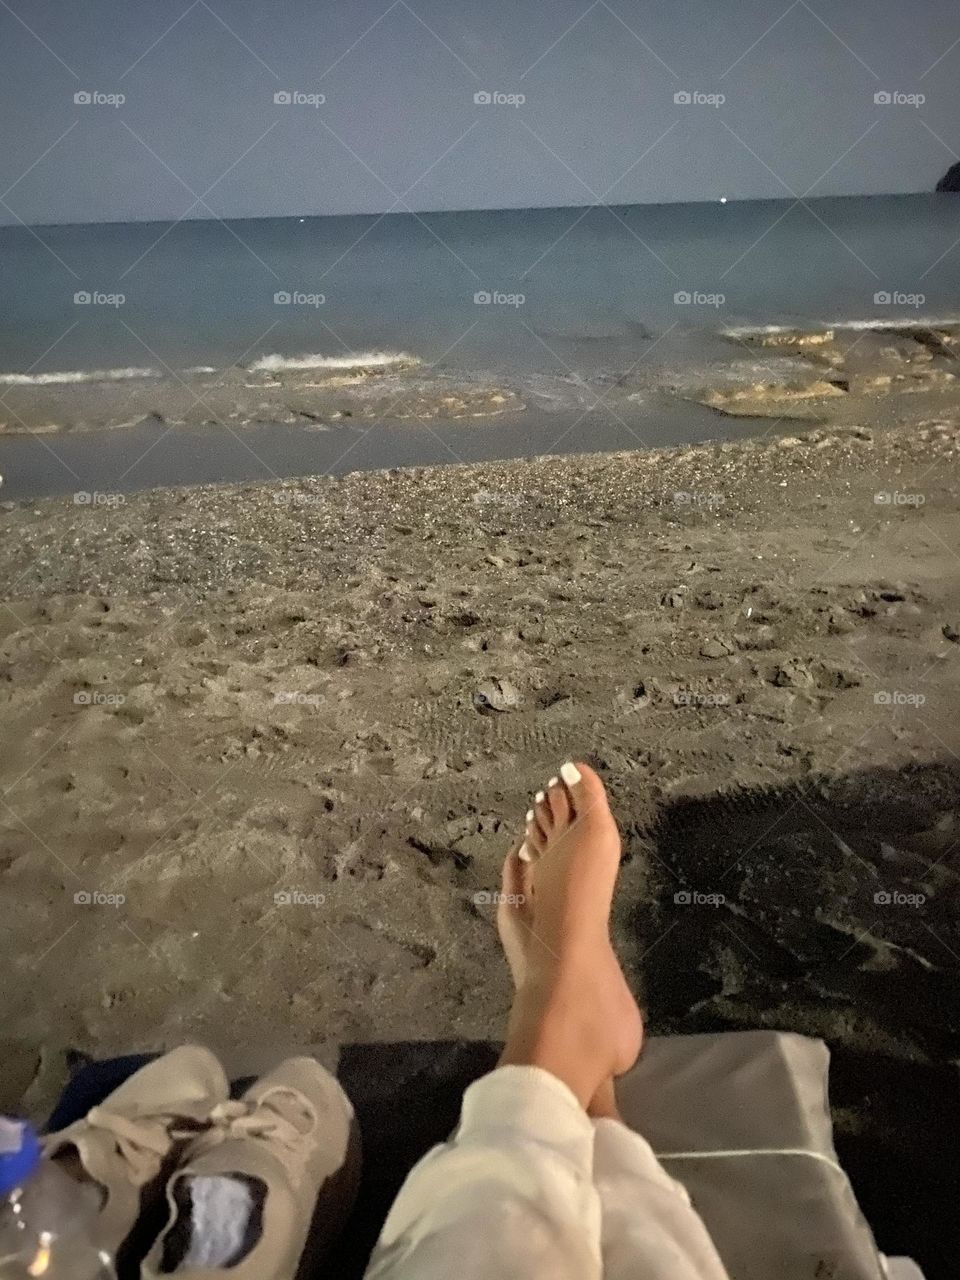 At the beach after sunset